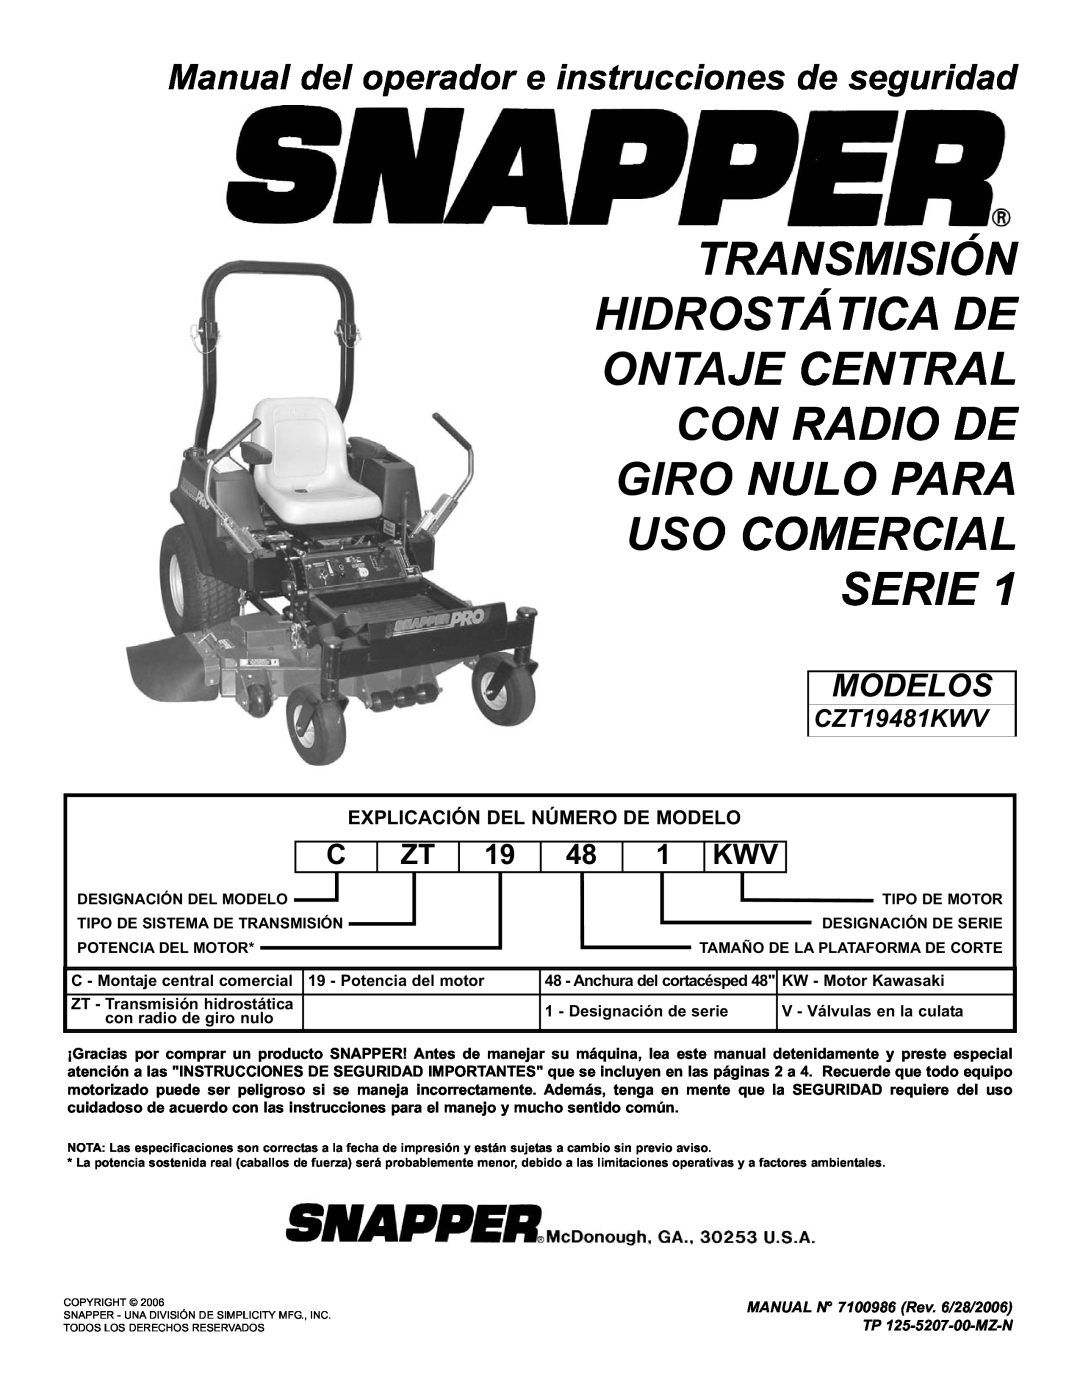 Snapper CZT19481KWV important safety instructions Commercial Mid-Mount Zero Turning Hydro Drive Series, Models 